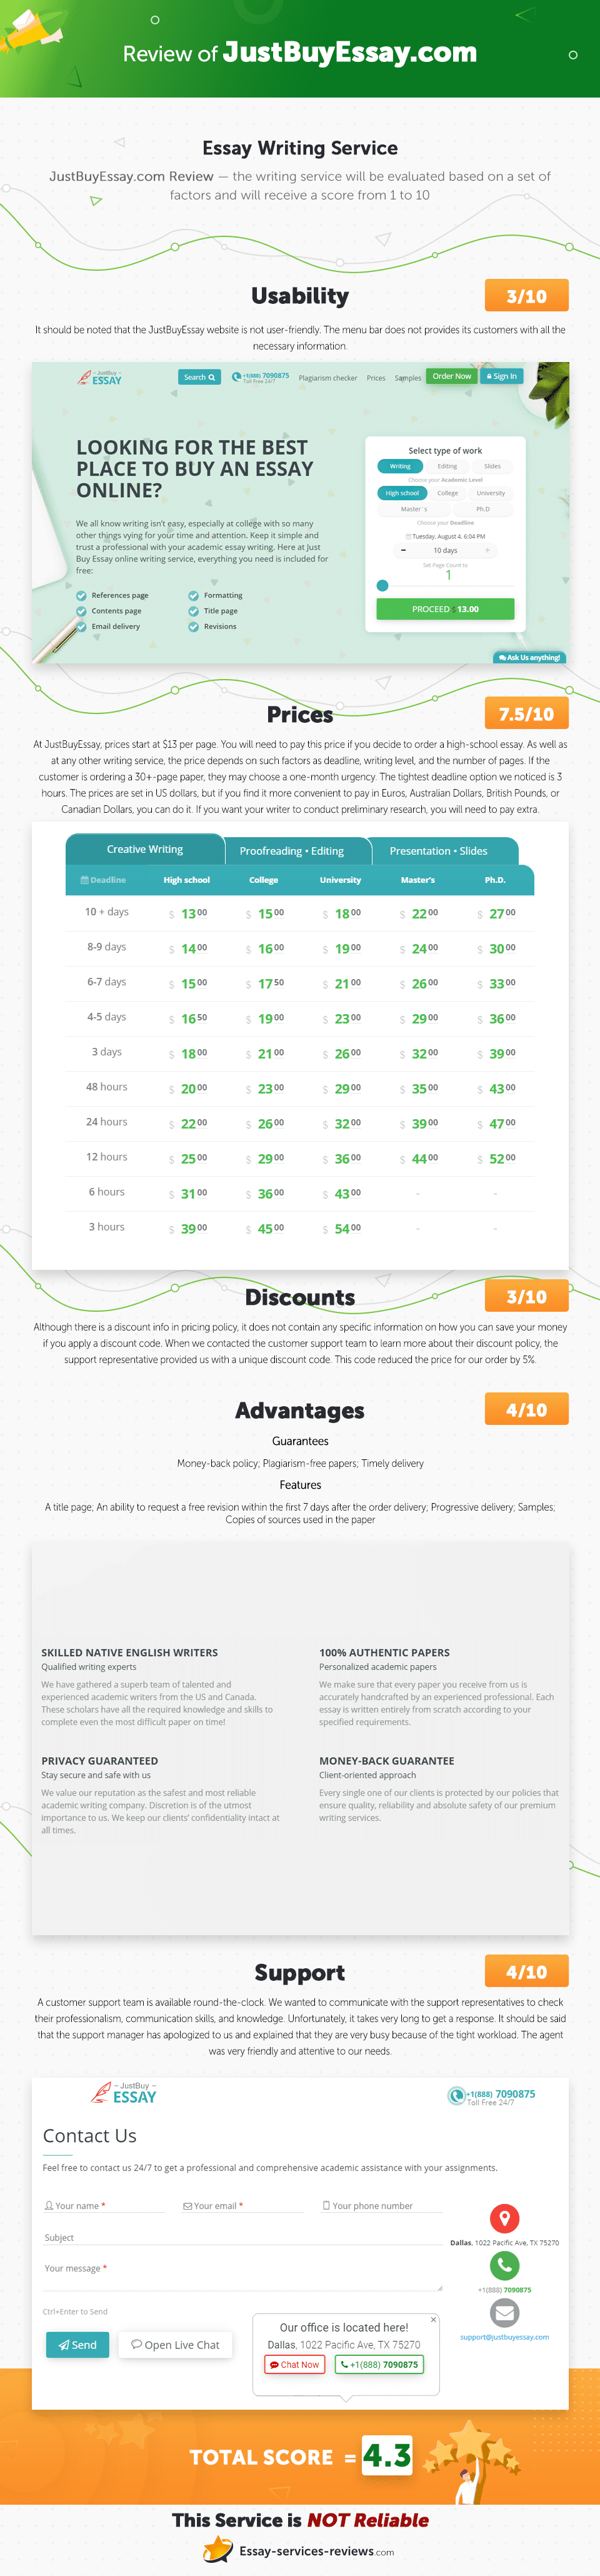 justbuyessay.com Infographic Review